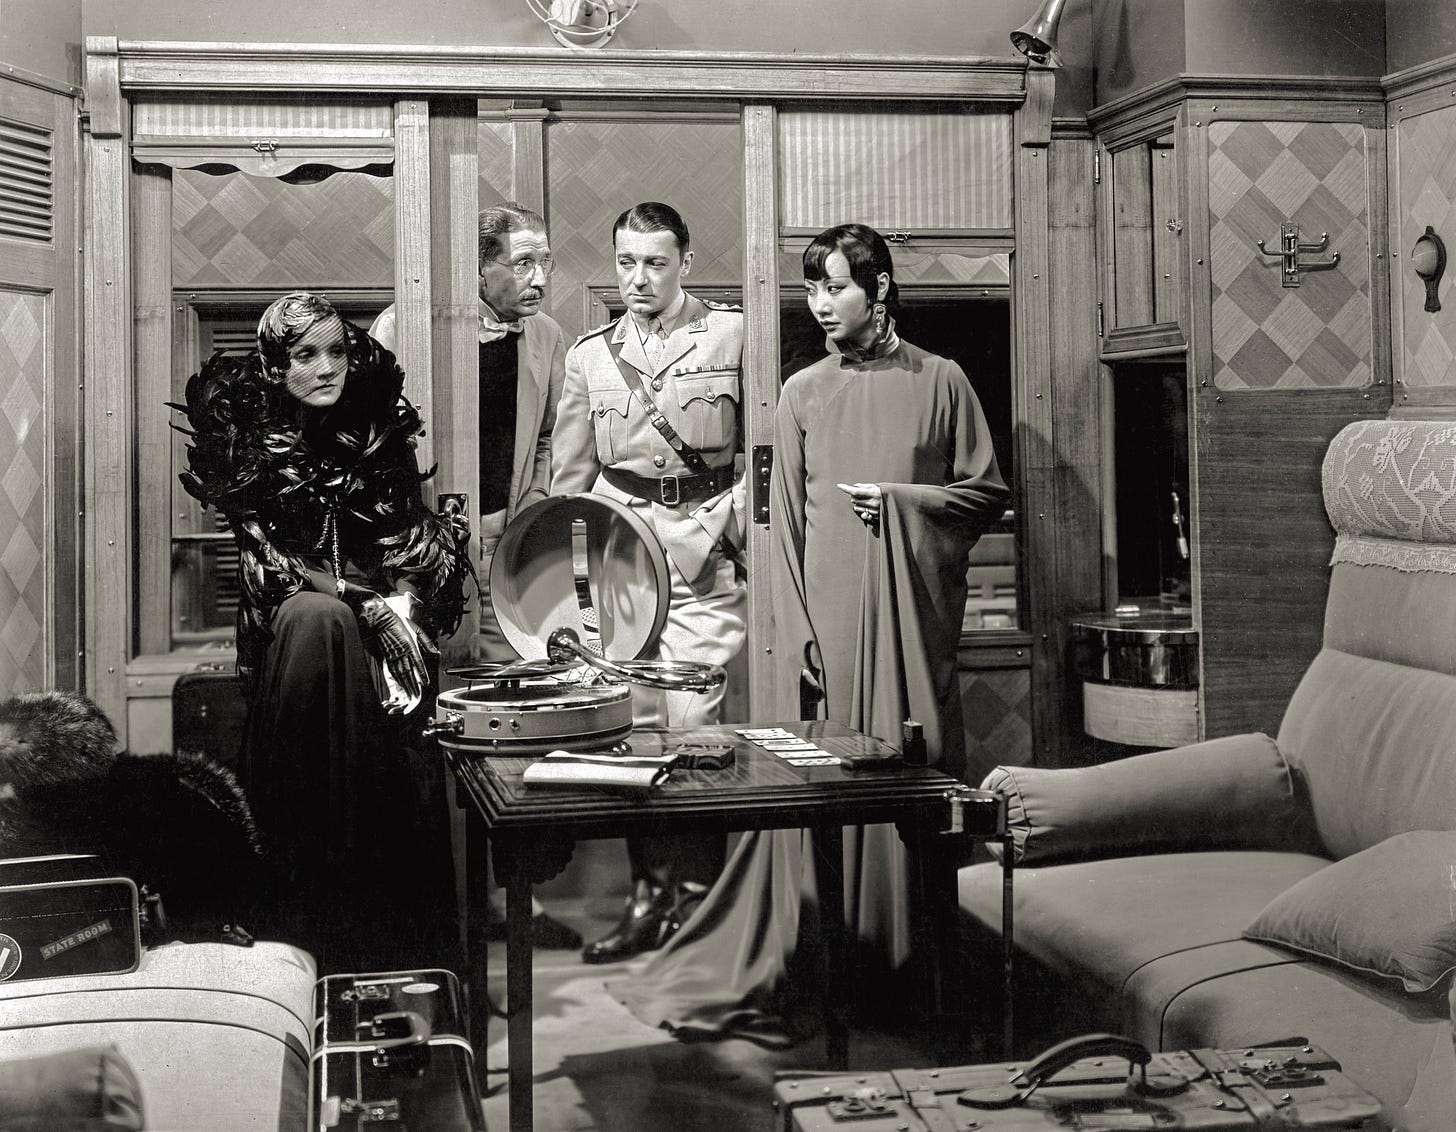 Marlene Dietrich, Clive Brook, and AMW stand in a train car in a scene from Shanghai Express (1932)